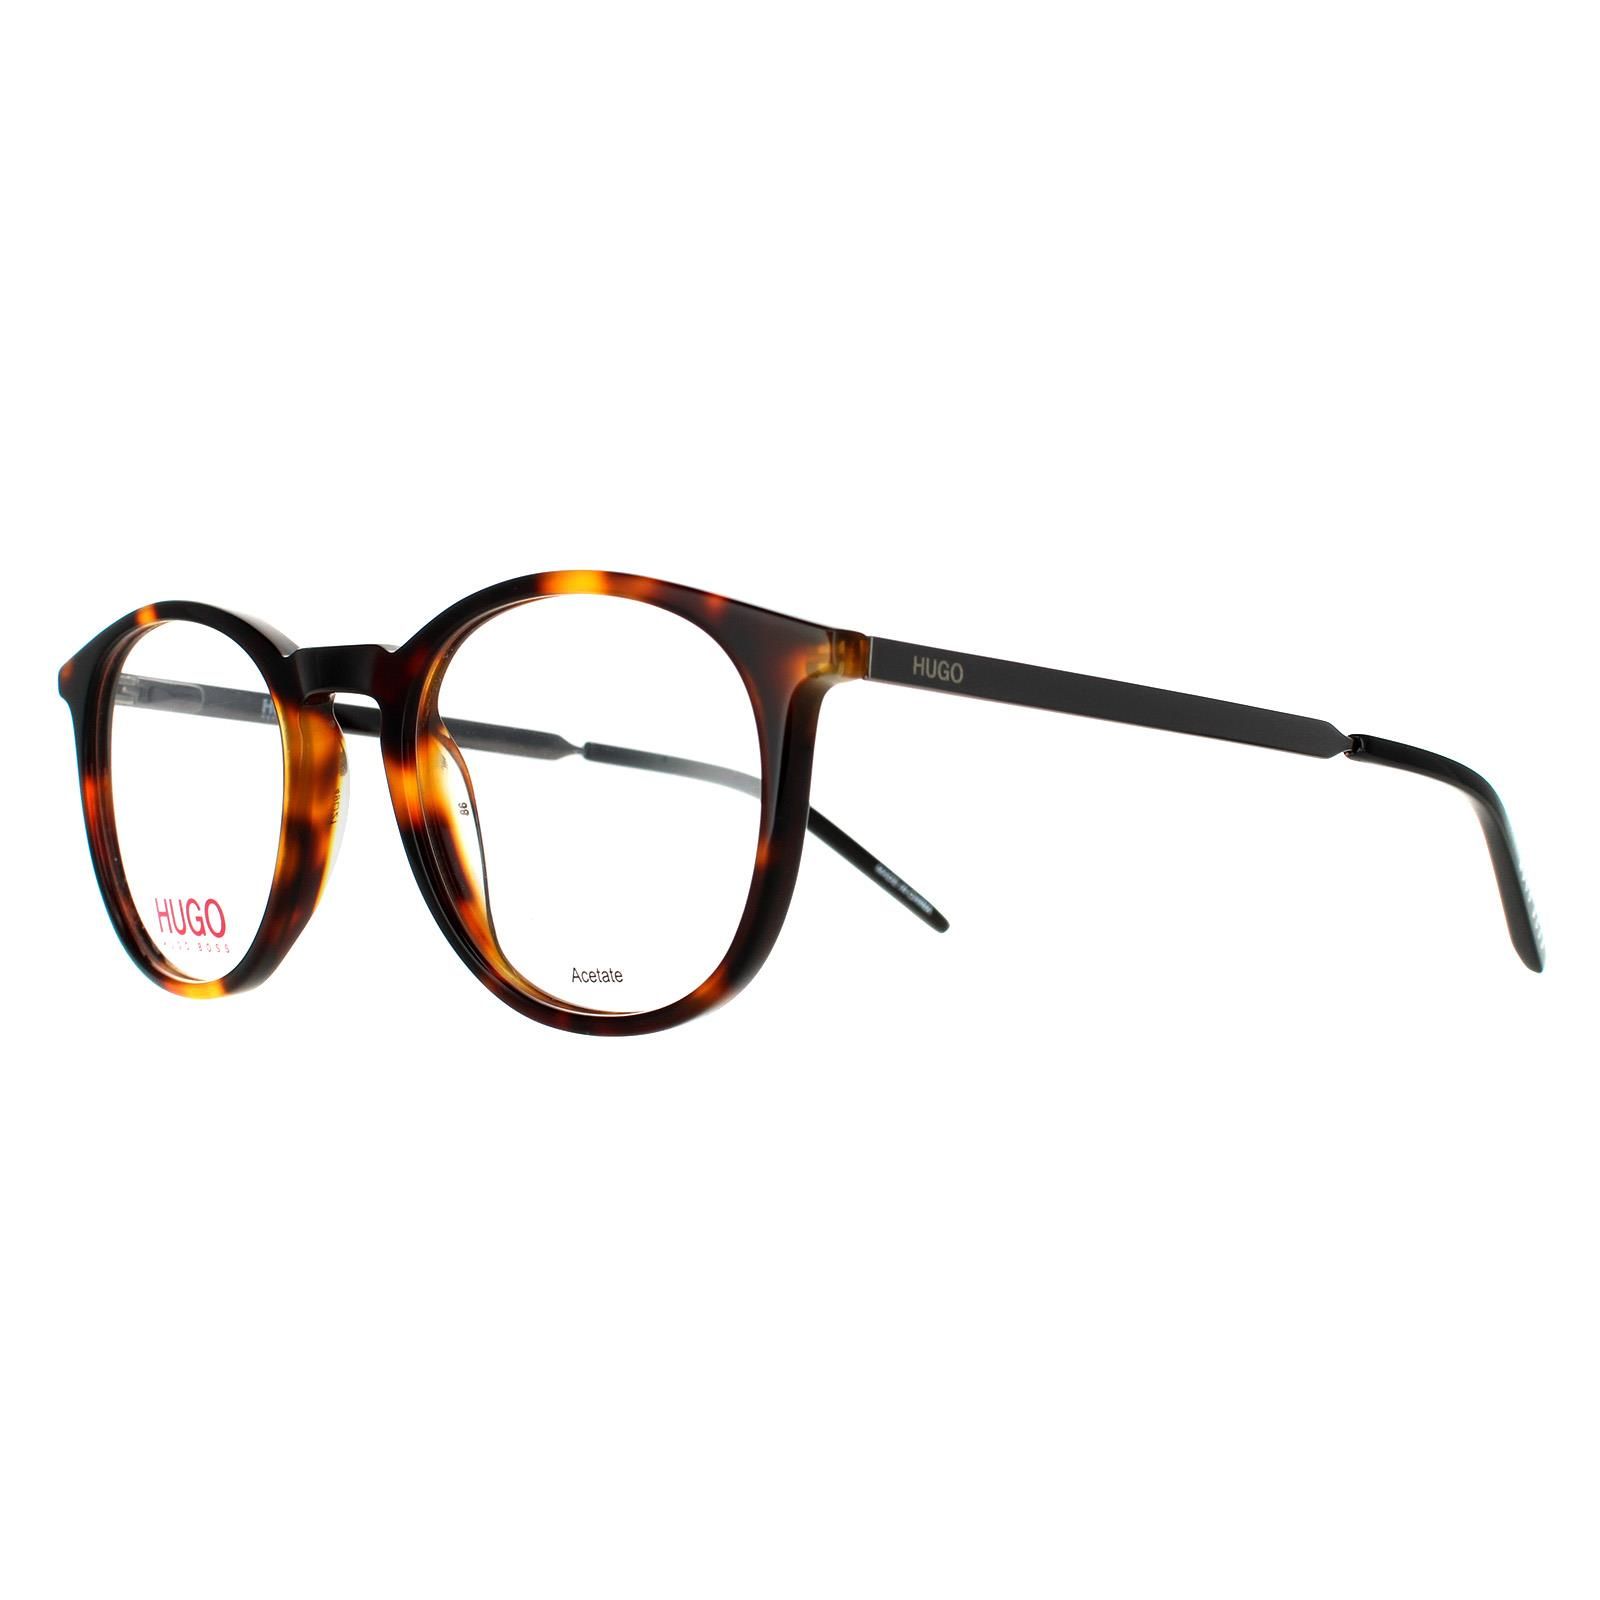 Hugo by Hugo Boss Round Mens Havana Glasses Frames HG 1017 are a stylish round style crafted from lightweight acetate. Slender temples are engraved with the Hugo Boss logo for authenticity.